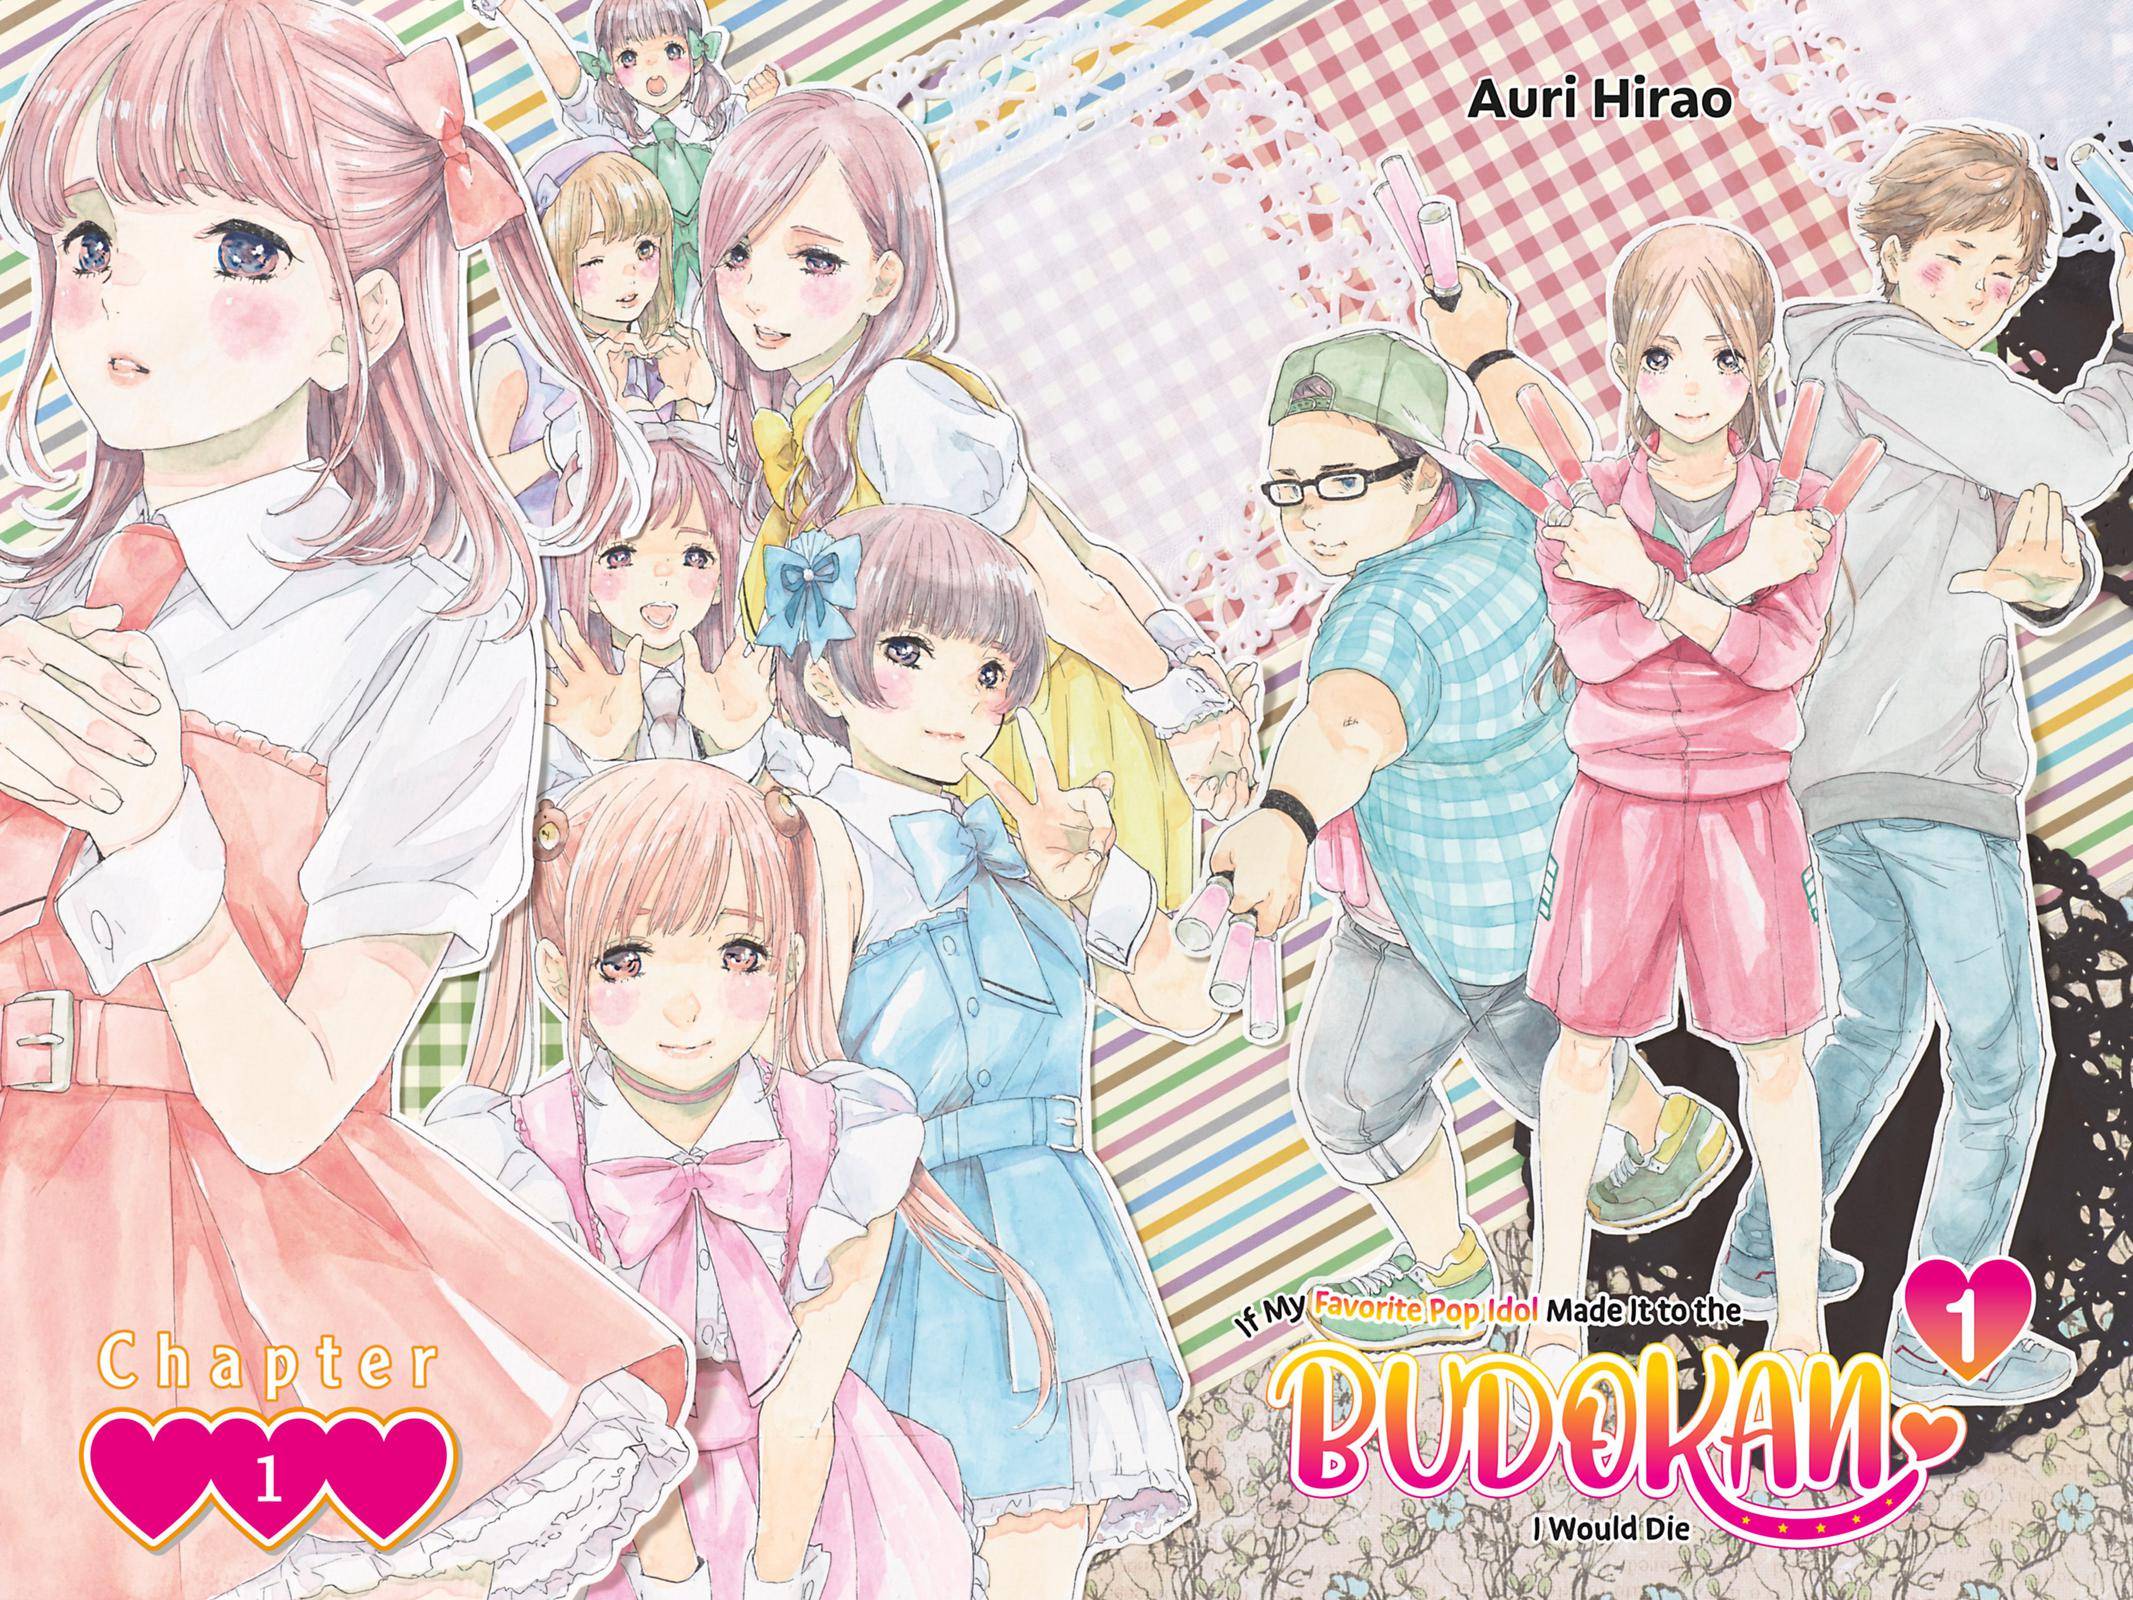 If My Favorite Pop Idol Made It to the Budokan, I Would Die - chapter 1 - #3